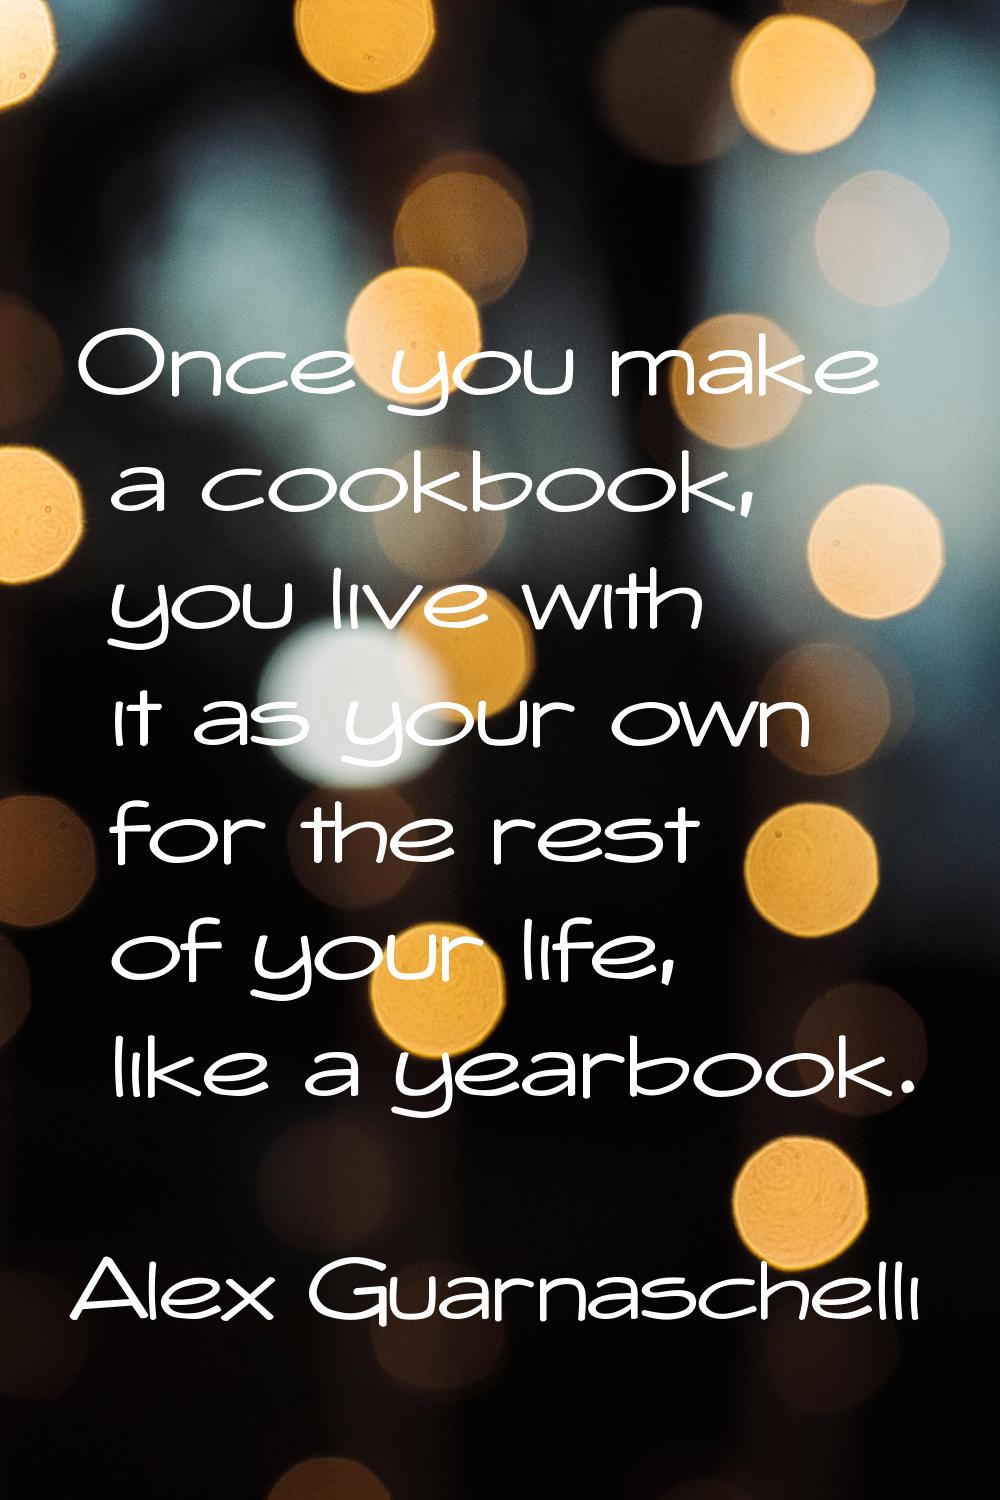 Once you make a cookbook, you live with it as your own for the rest of your life, like a yearbook.